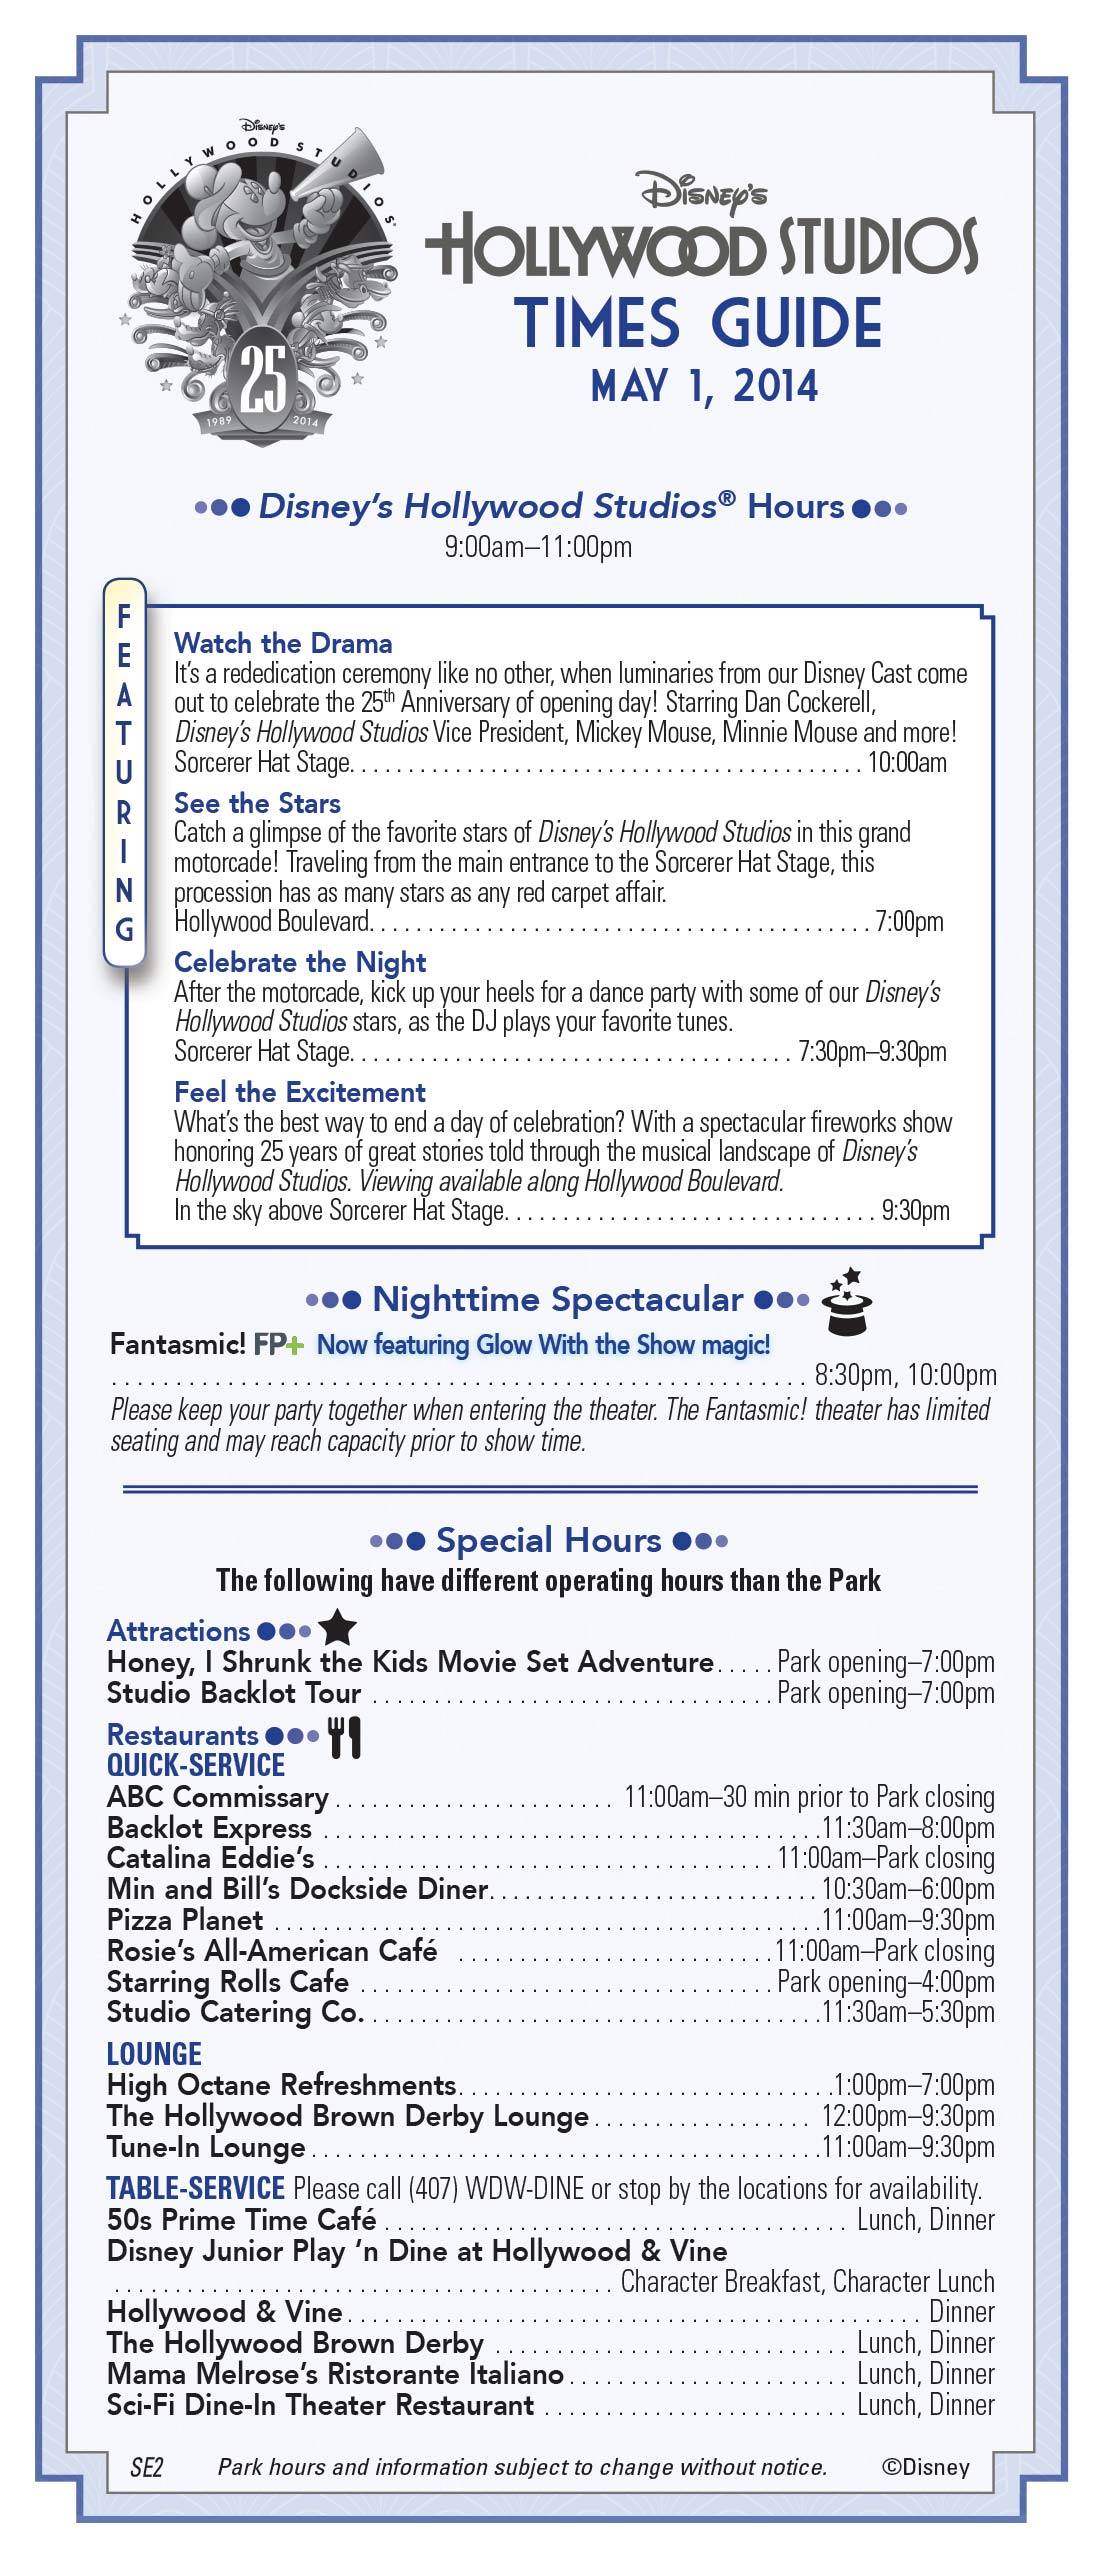 Disney's Hollywood Studios 25th Anniversary times guide